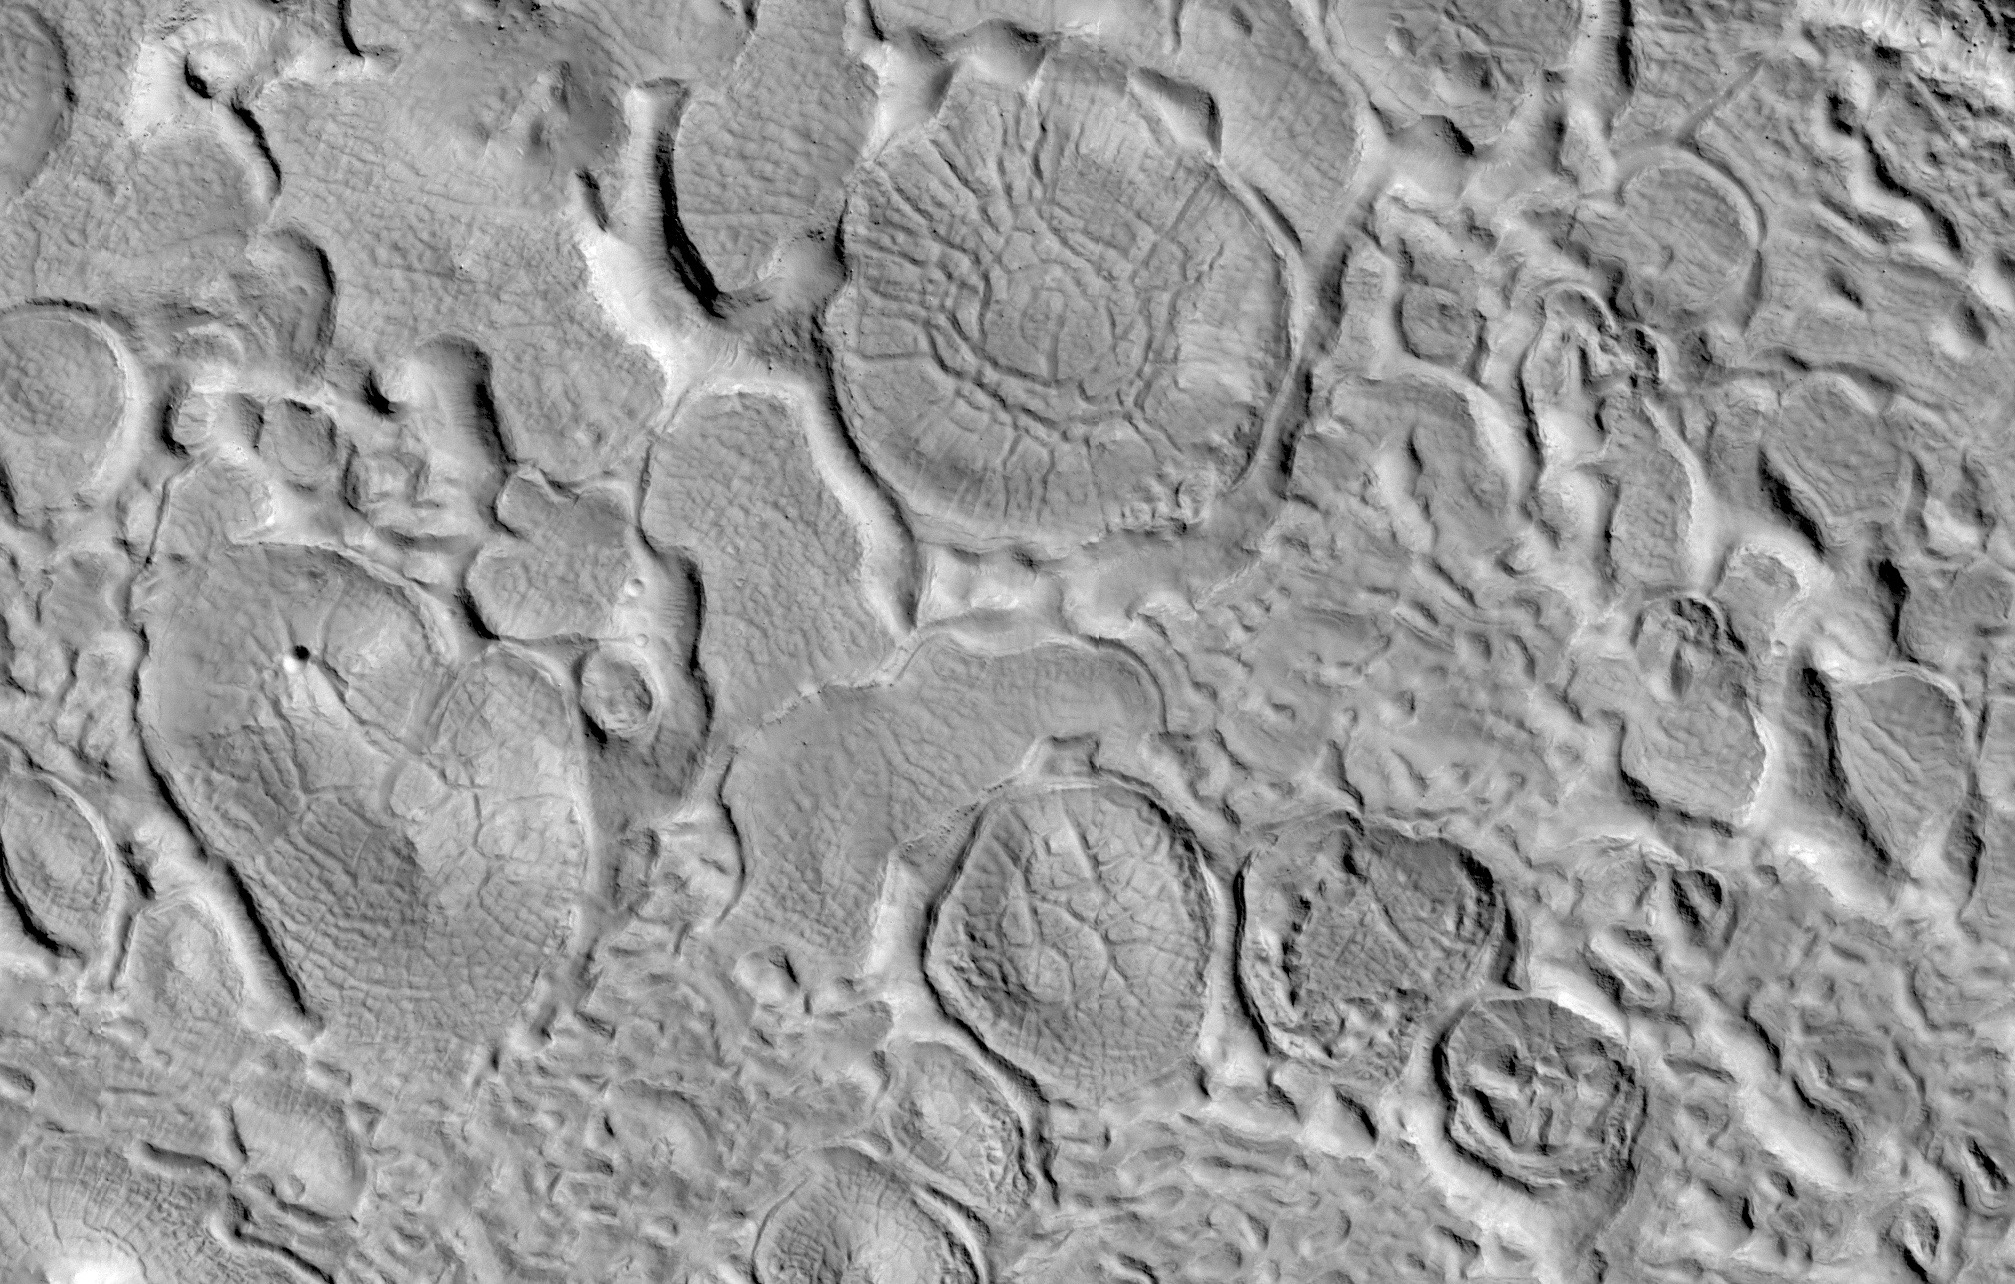 Mysterious icy wonders of Mars: Captured by NASA's HiRISE camera